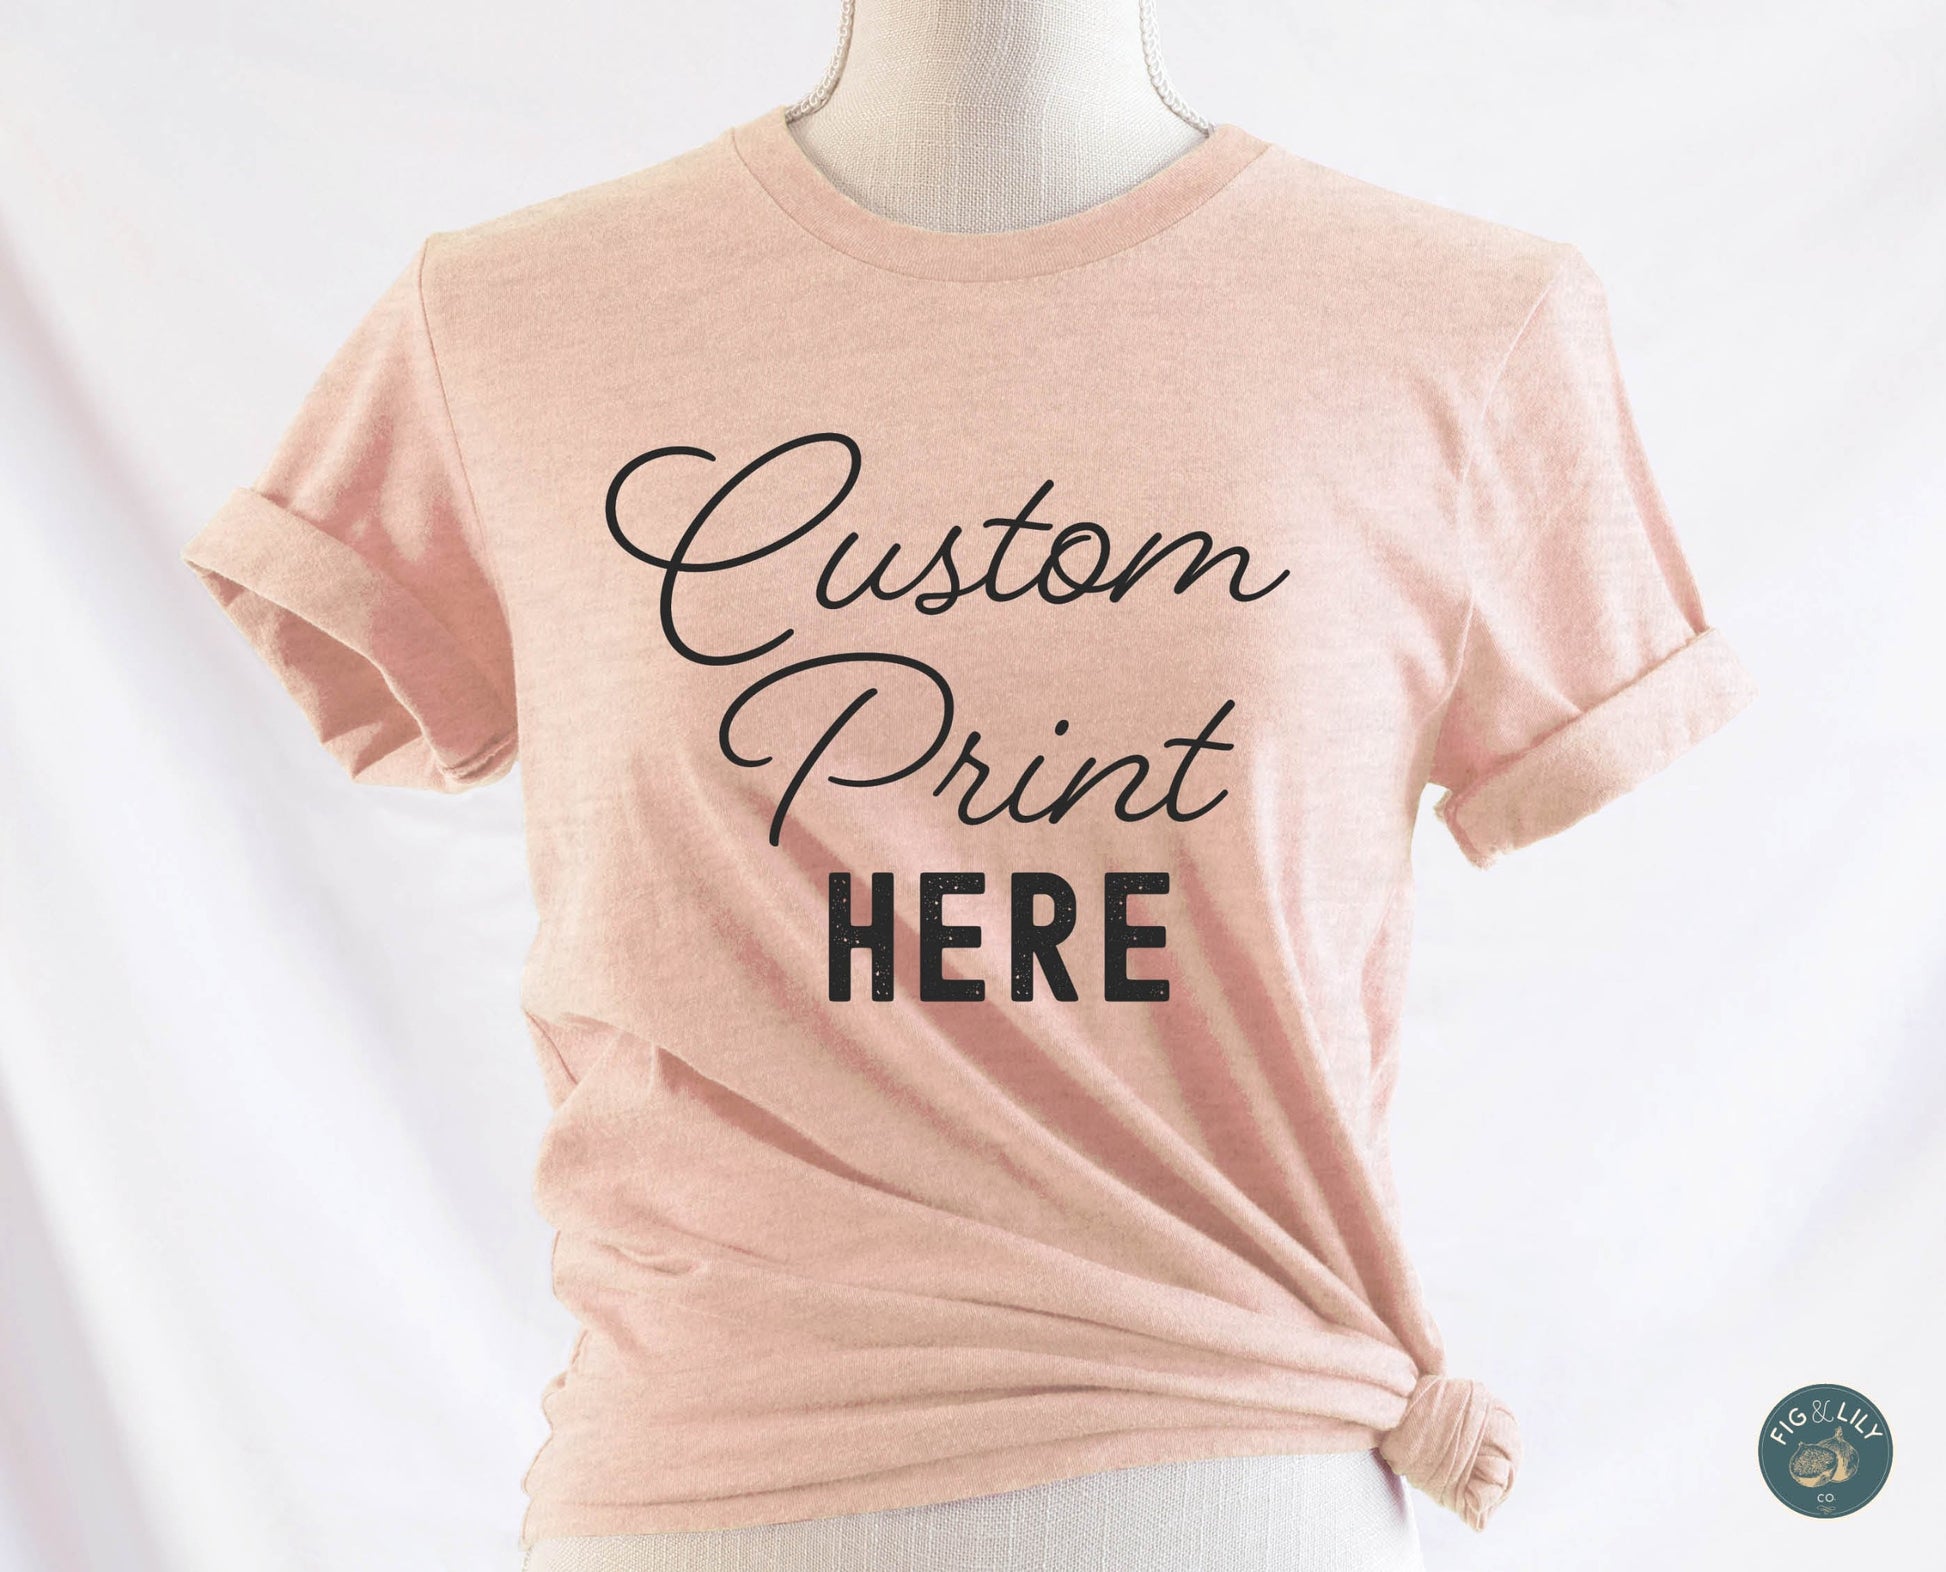 Fig & Lily Co. custom soft heather prism peach unisex t-shirt with your personalized design printed, custom graphic design tees for men and women